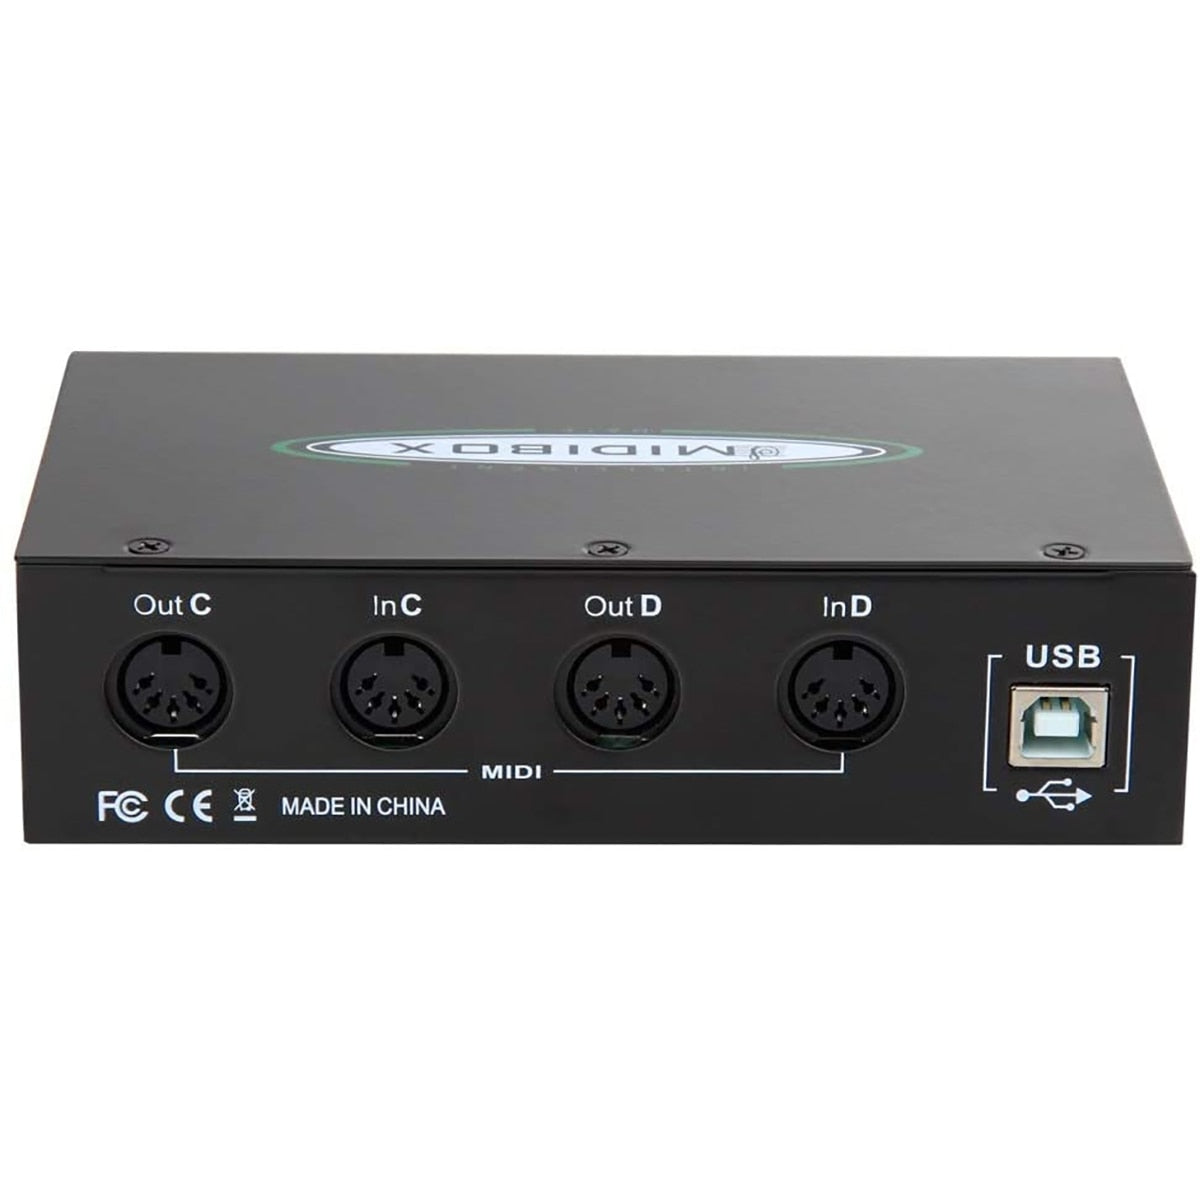 Switchable USB MIDI Interface 4 in/out plus standalone Merge function